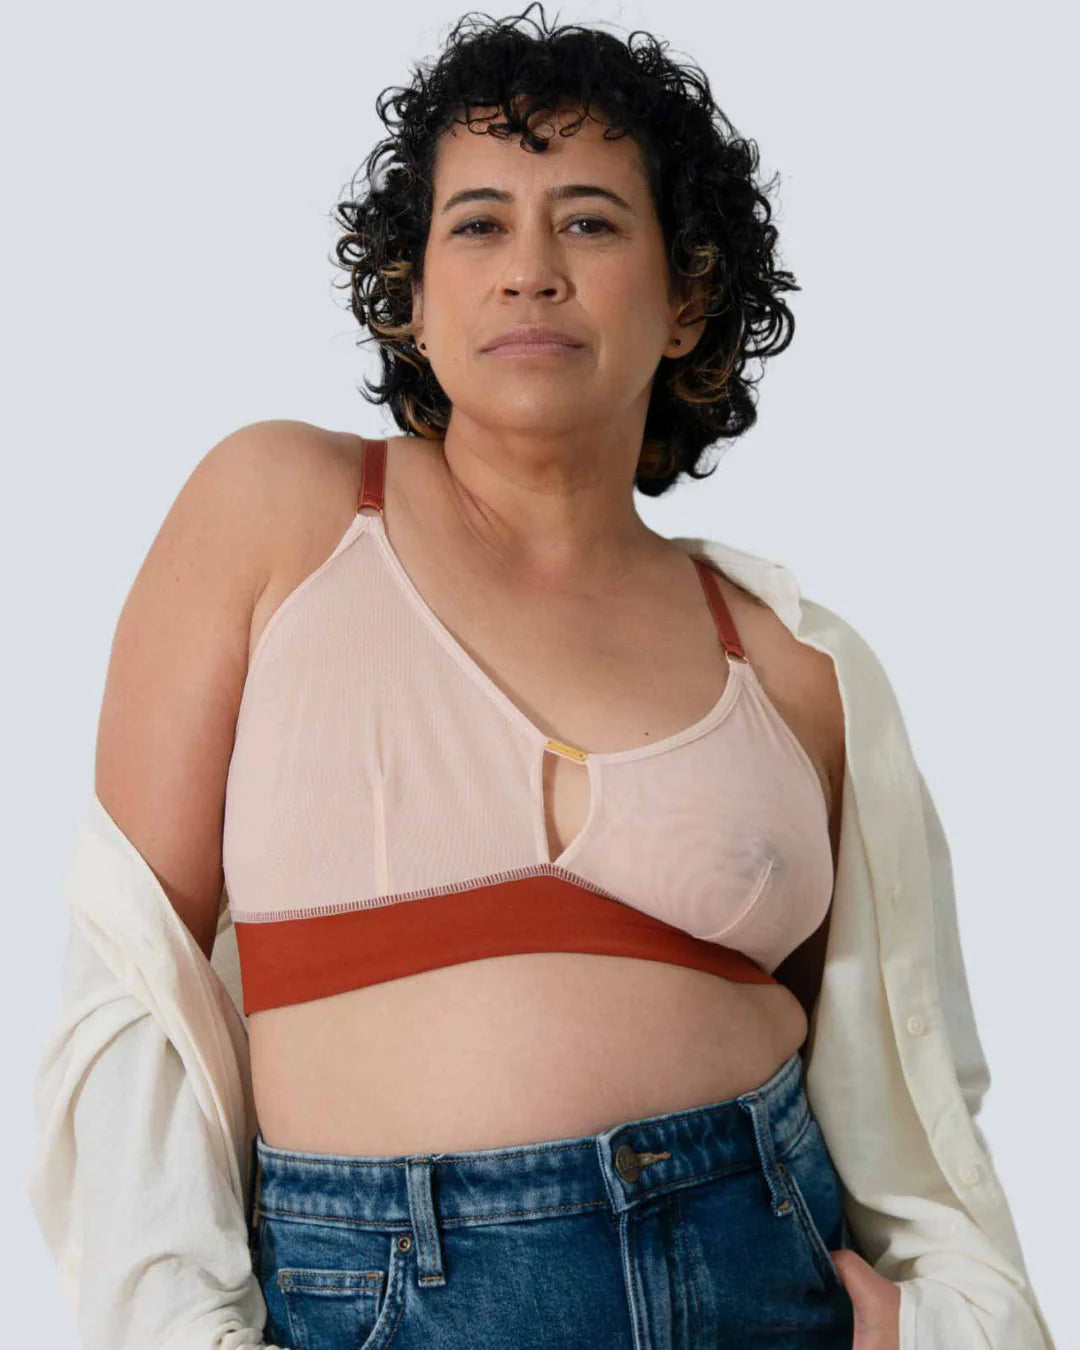 AnaOno on LinkedIn: 21 Best Bras for Small Breasts That Are Super Comfy and  Flattering